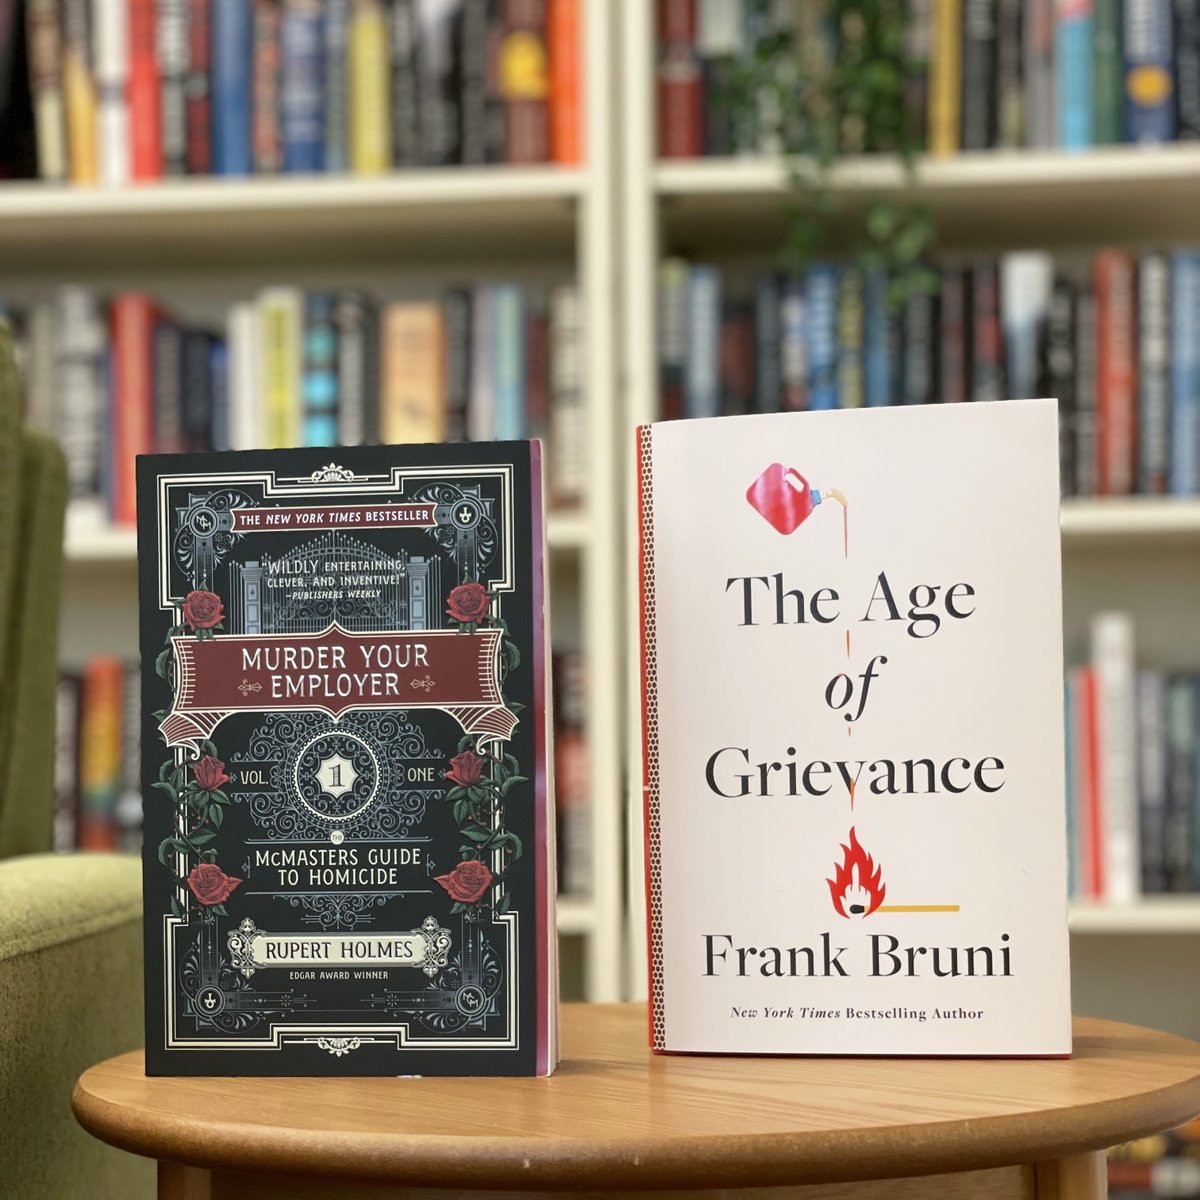 Not one, but TWO NYT BESTSELLERS!! 🎉 Congrats to @FrankBruni and Rupert Holmes, we're so happy to see that so many readers are loving your stories as much as we do. ❤️